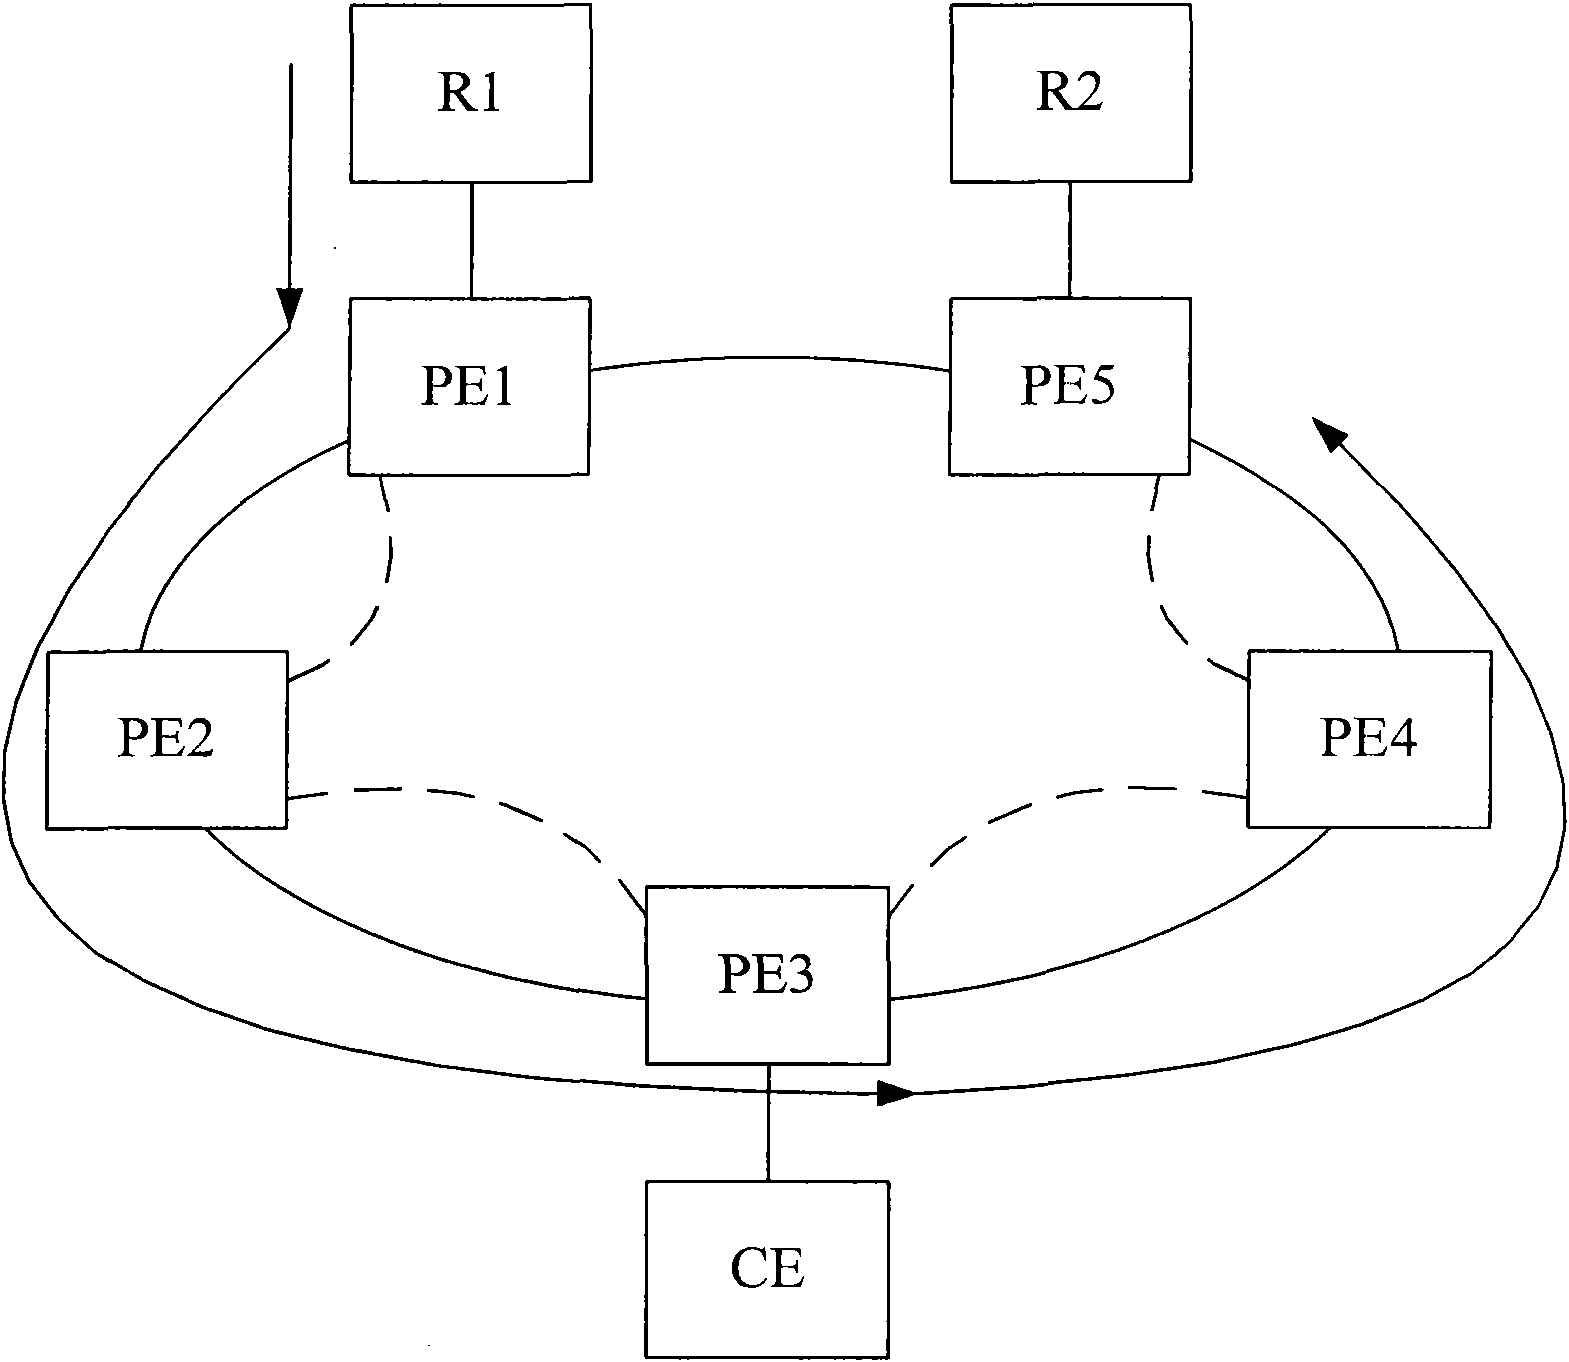 Ethernet and multicast stream processing method based on VPLS